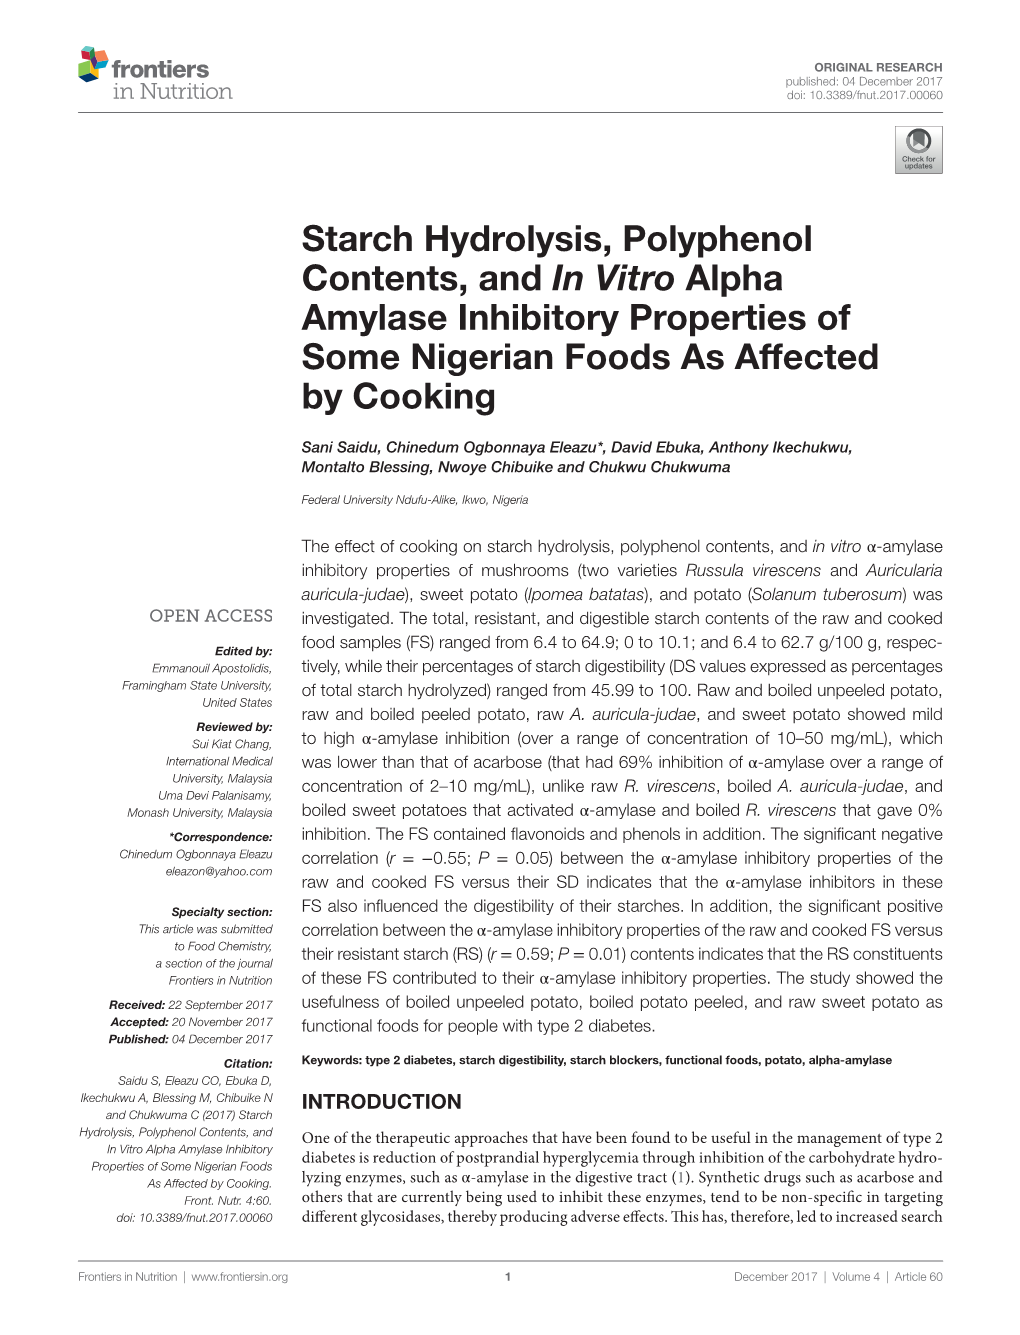 Starch Hydrolysis, Polyphenol Contents, and in Vitro Alpha Amylase Inhibitory Properties of Some Nigerian Foods As Affected by Cooking